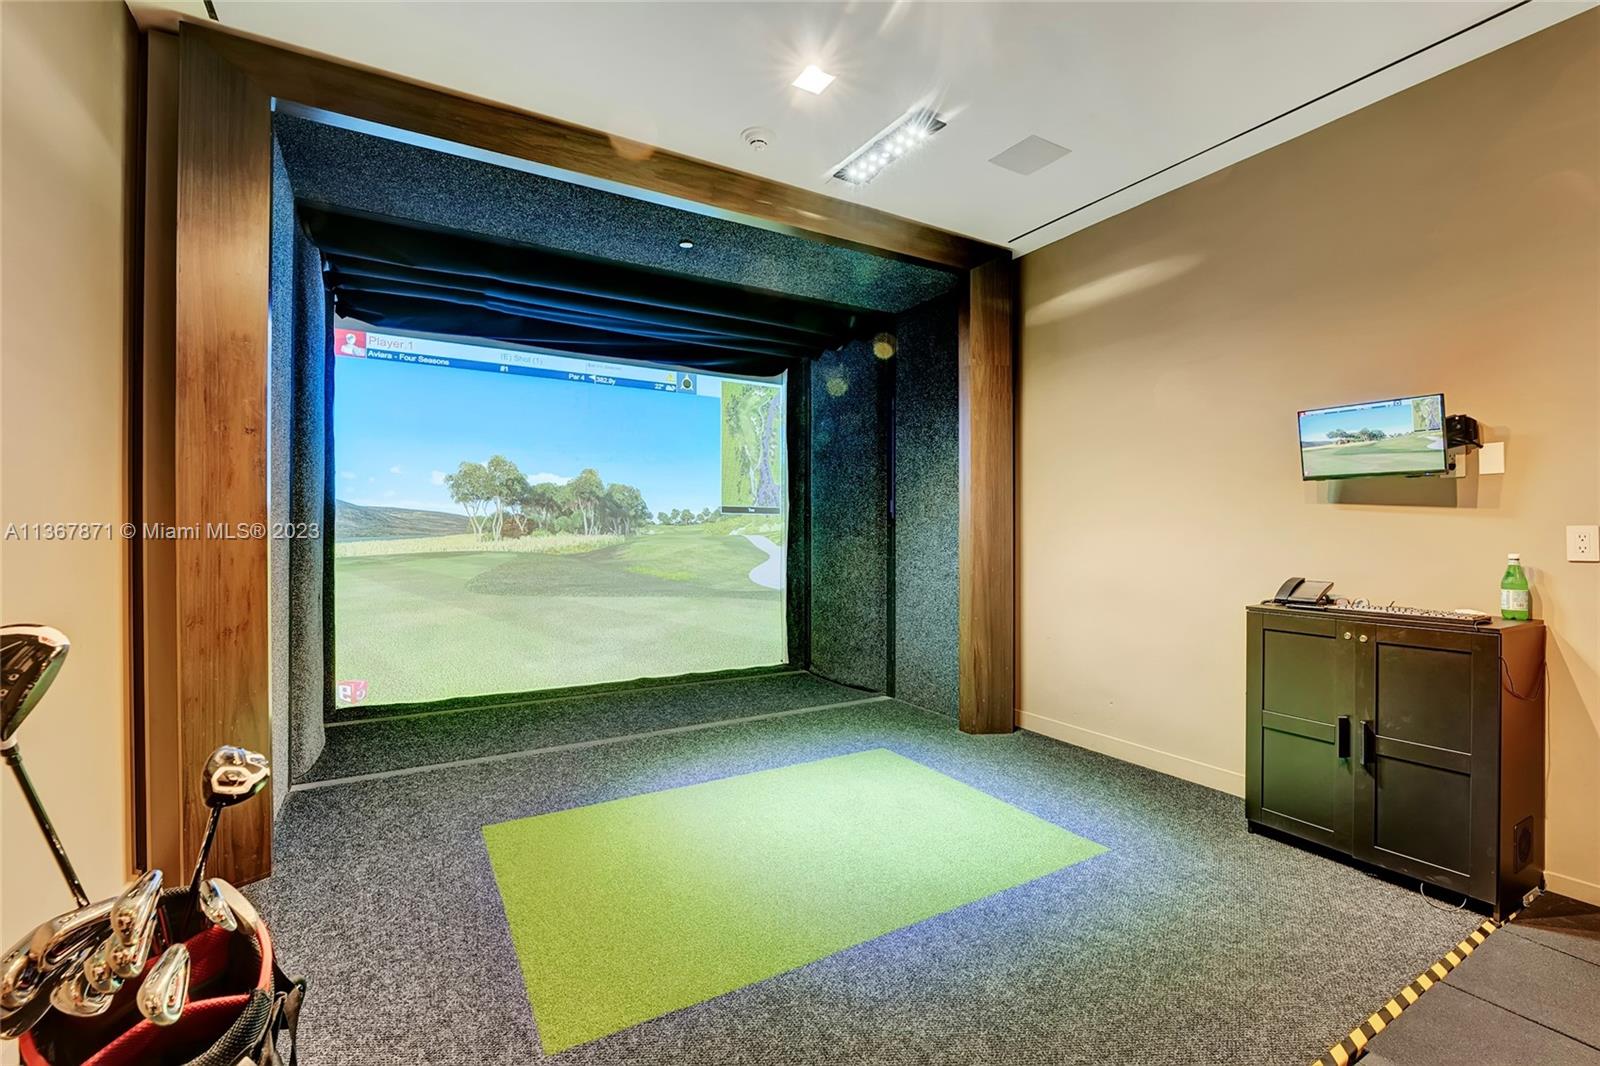 Play golf anywhere in the world in this simulated golf course room for owners.